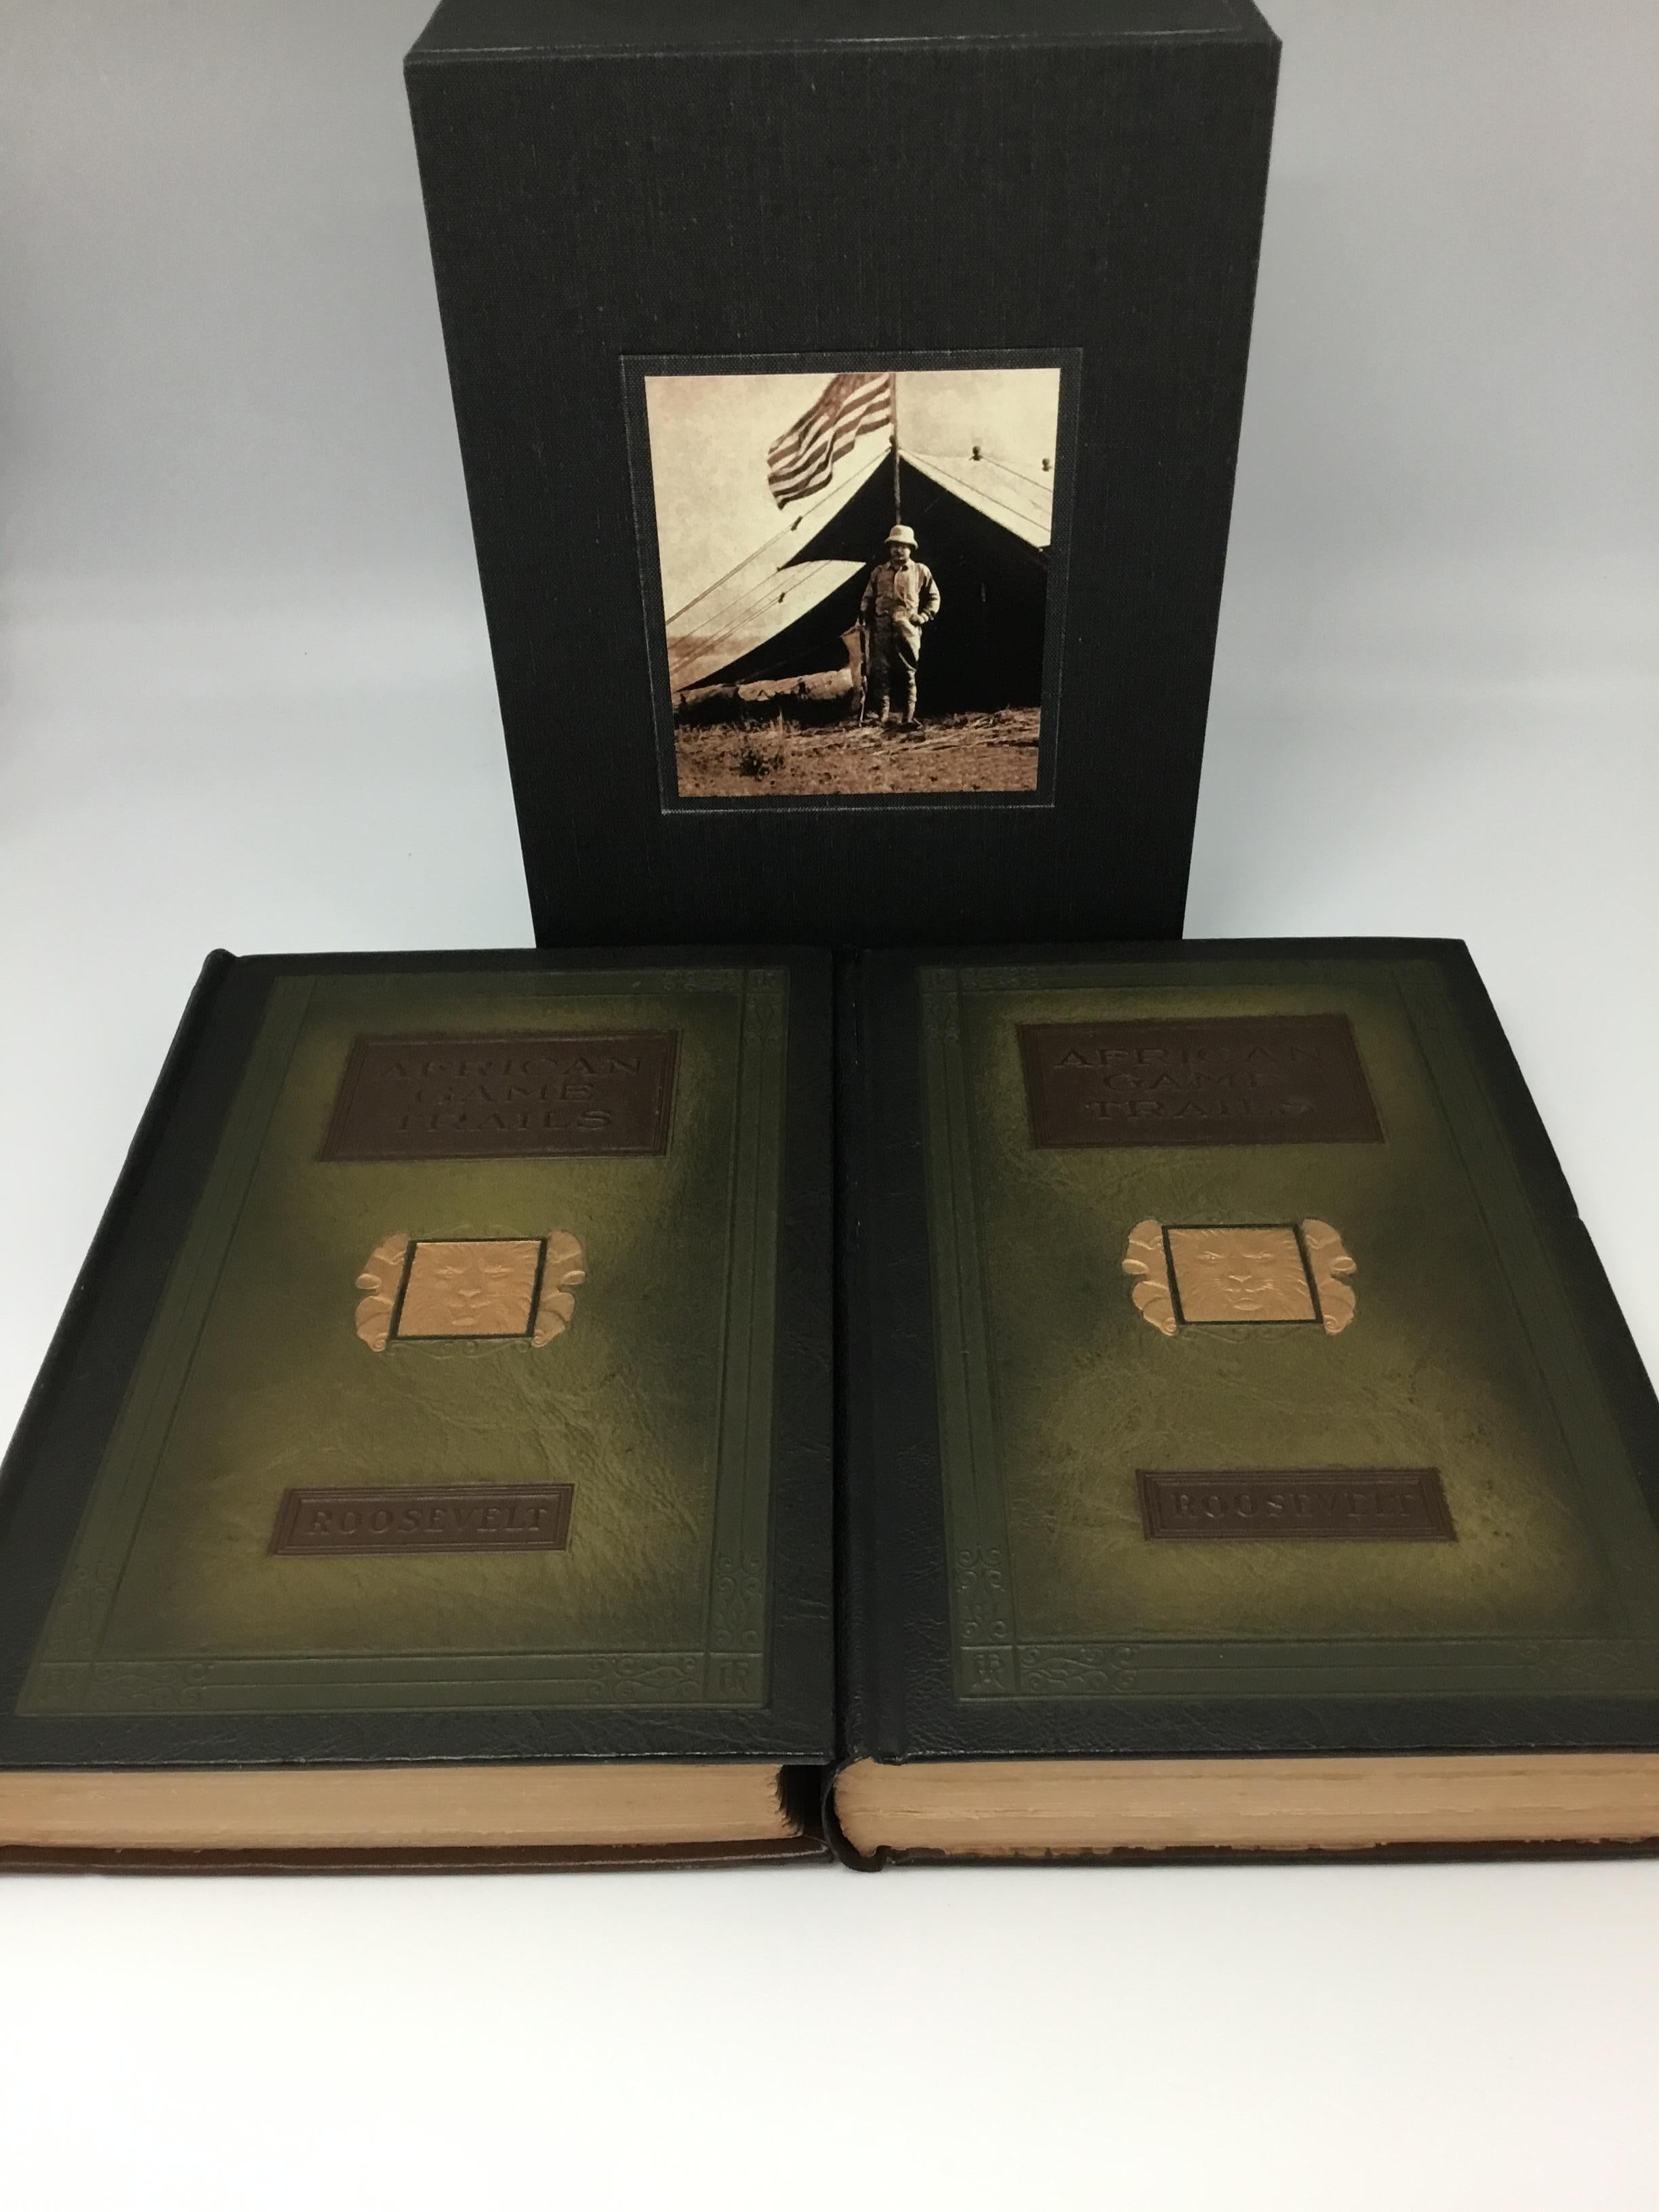 Roosevelt, Theodore, African Game Trails: An Account of the African Wanderings of an American Hunter-Naturalist. New York: Charles Scribner’s Sons, 1926. Two volumes, early edition. Original boards with a custom-built cloth slipcase. 

Presented